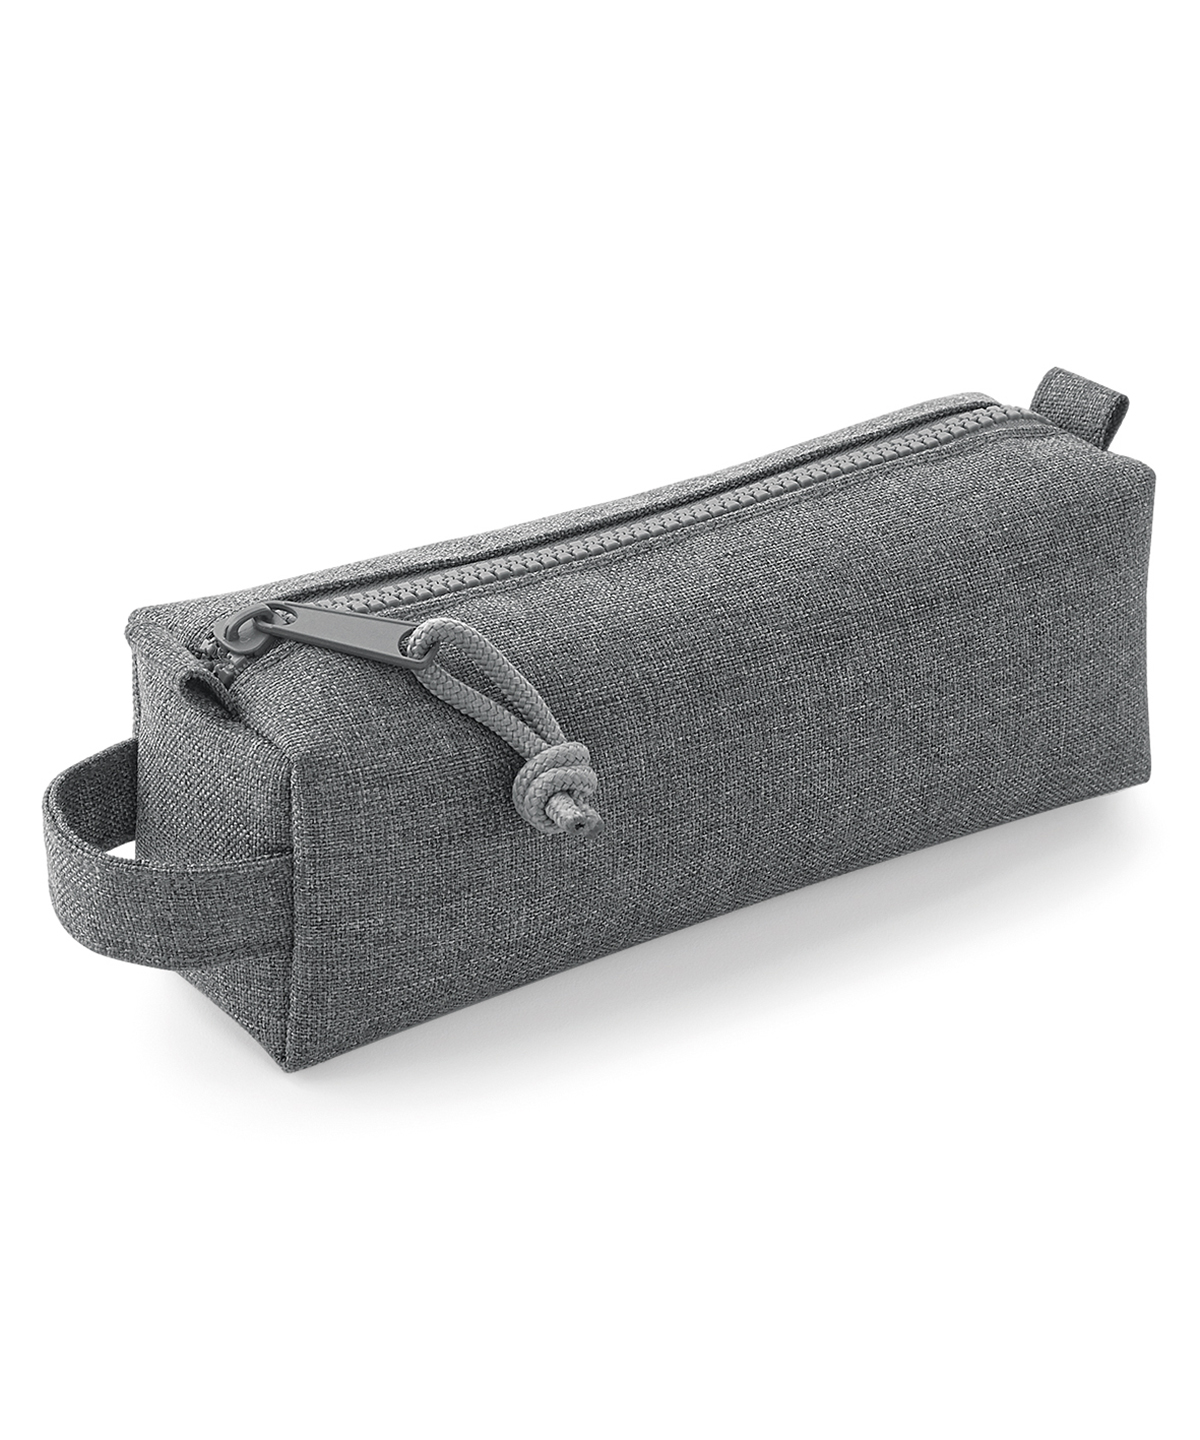 Essential Pencil/Accessory Case Grey Marl Size One Size